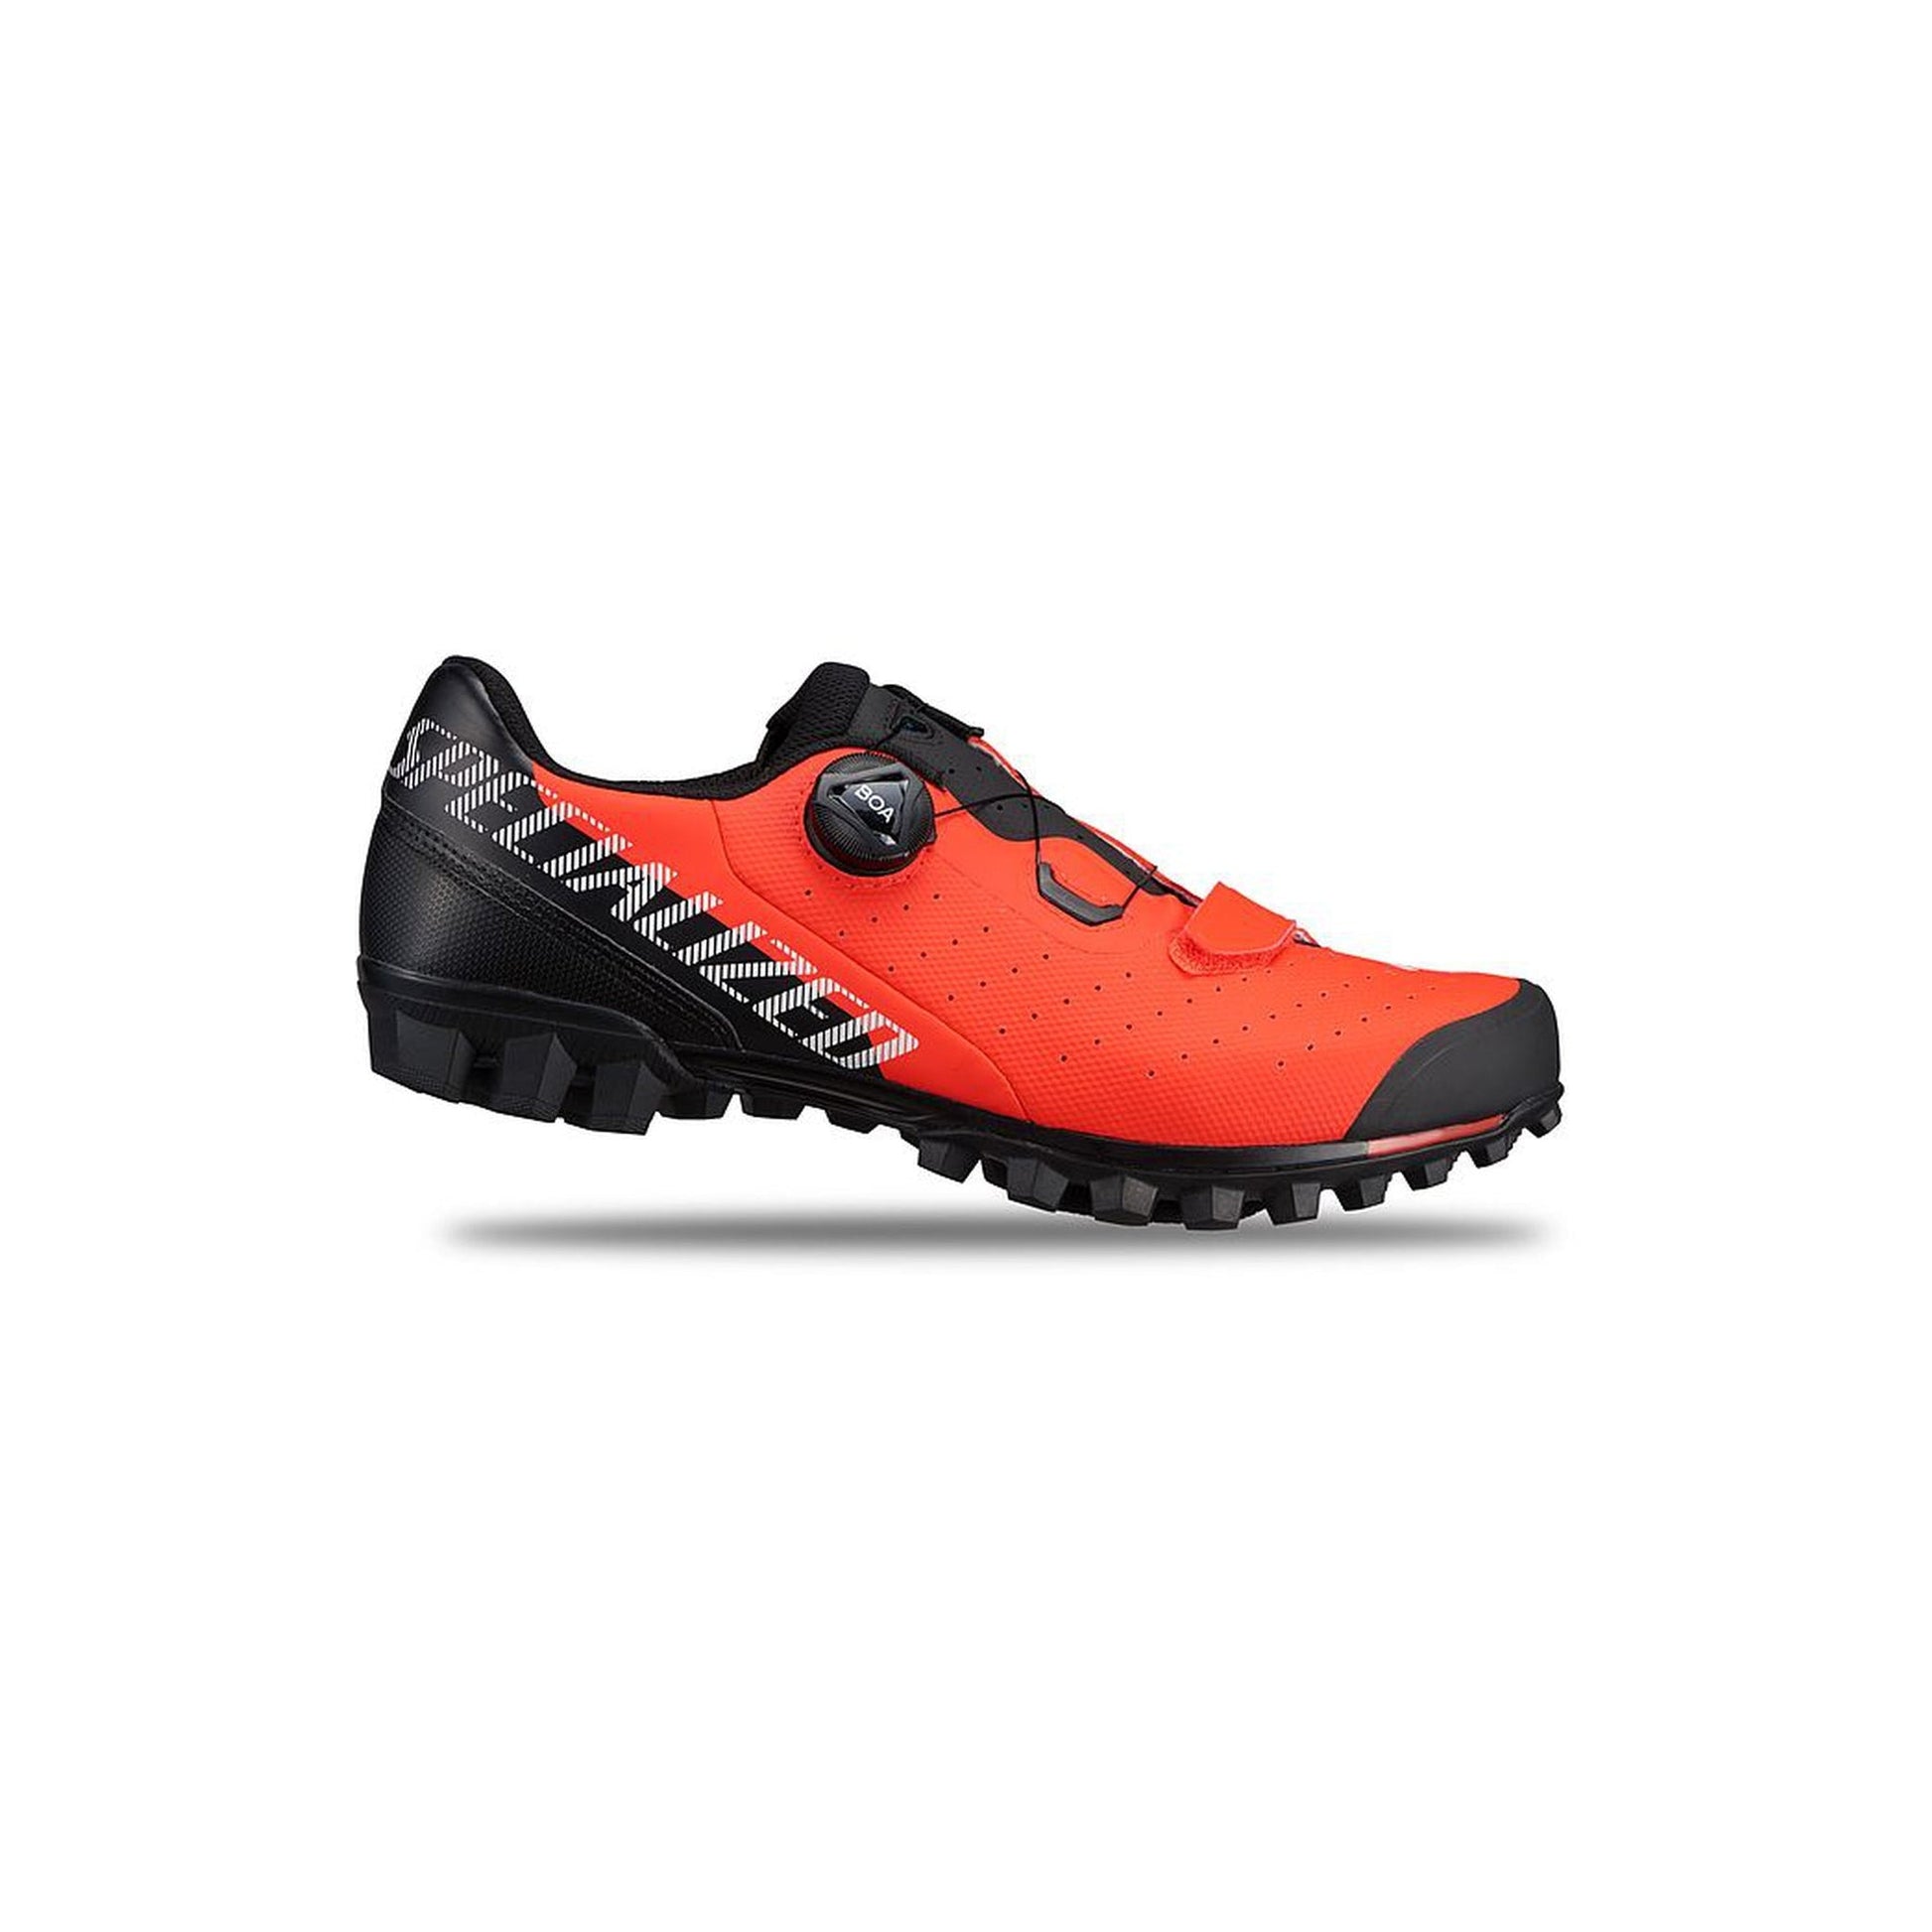 Recon 2.0 Mountain Bike Shoes-Cycles Direct Specialized